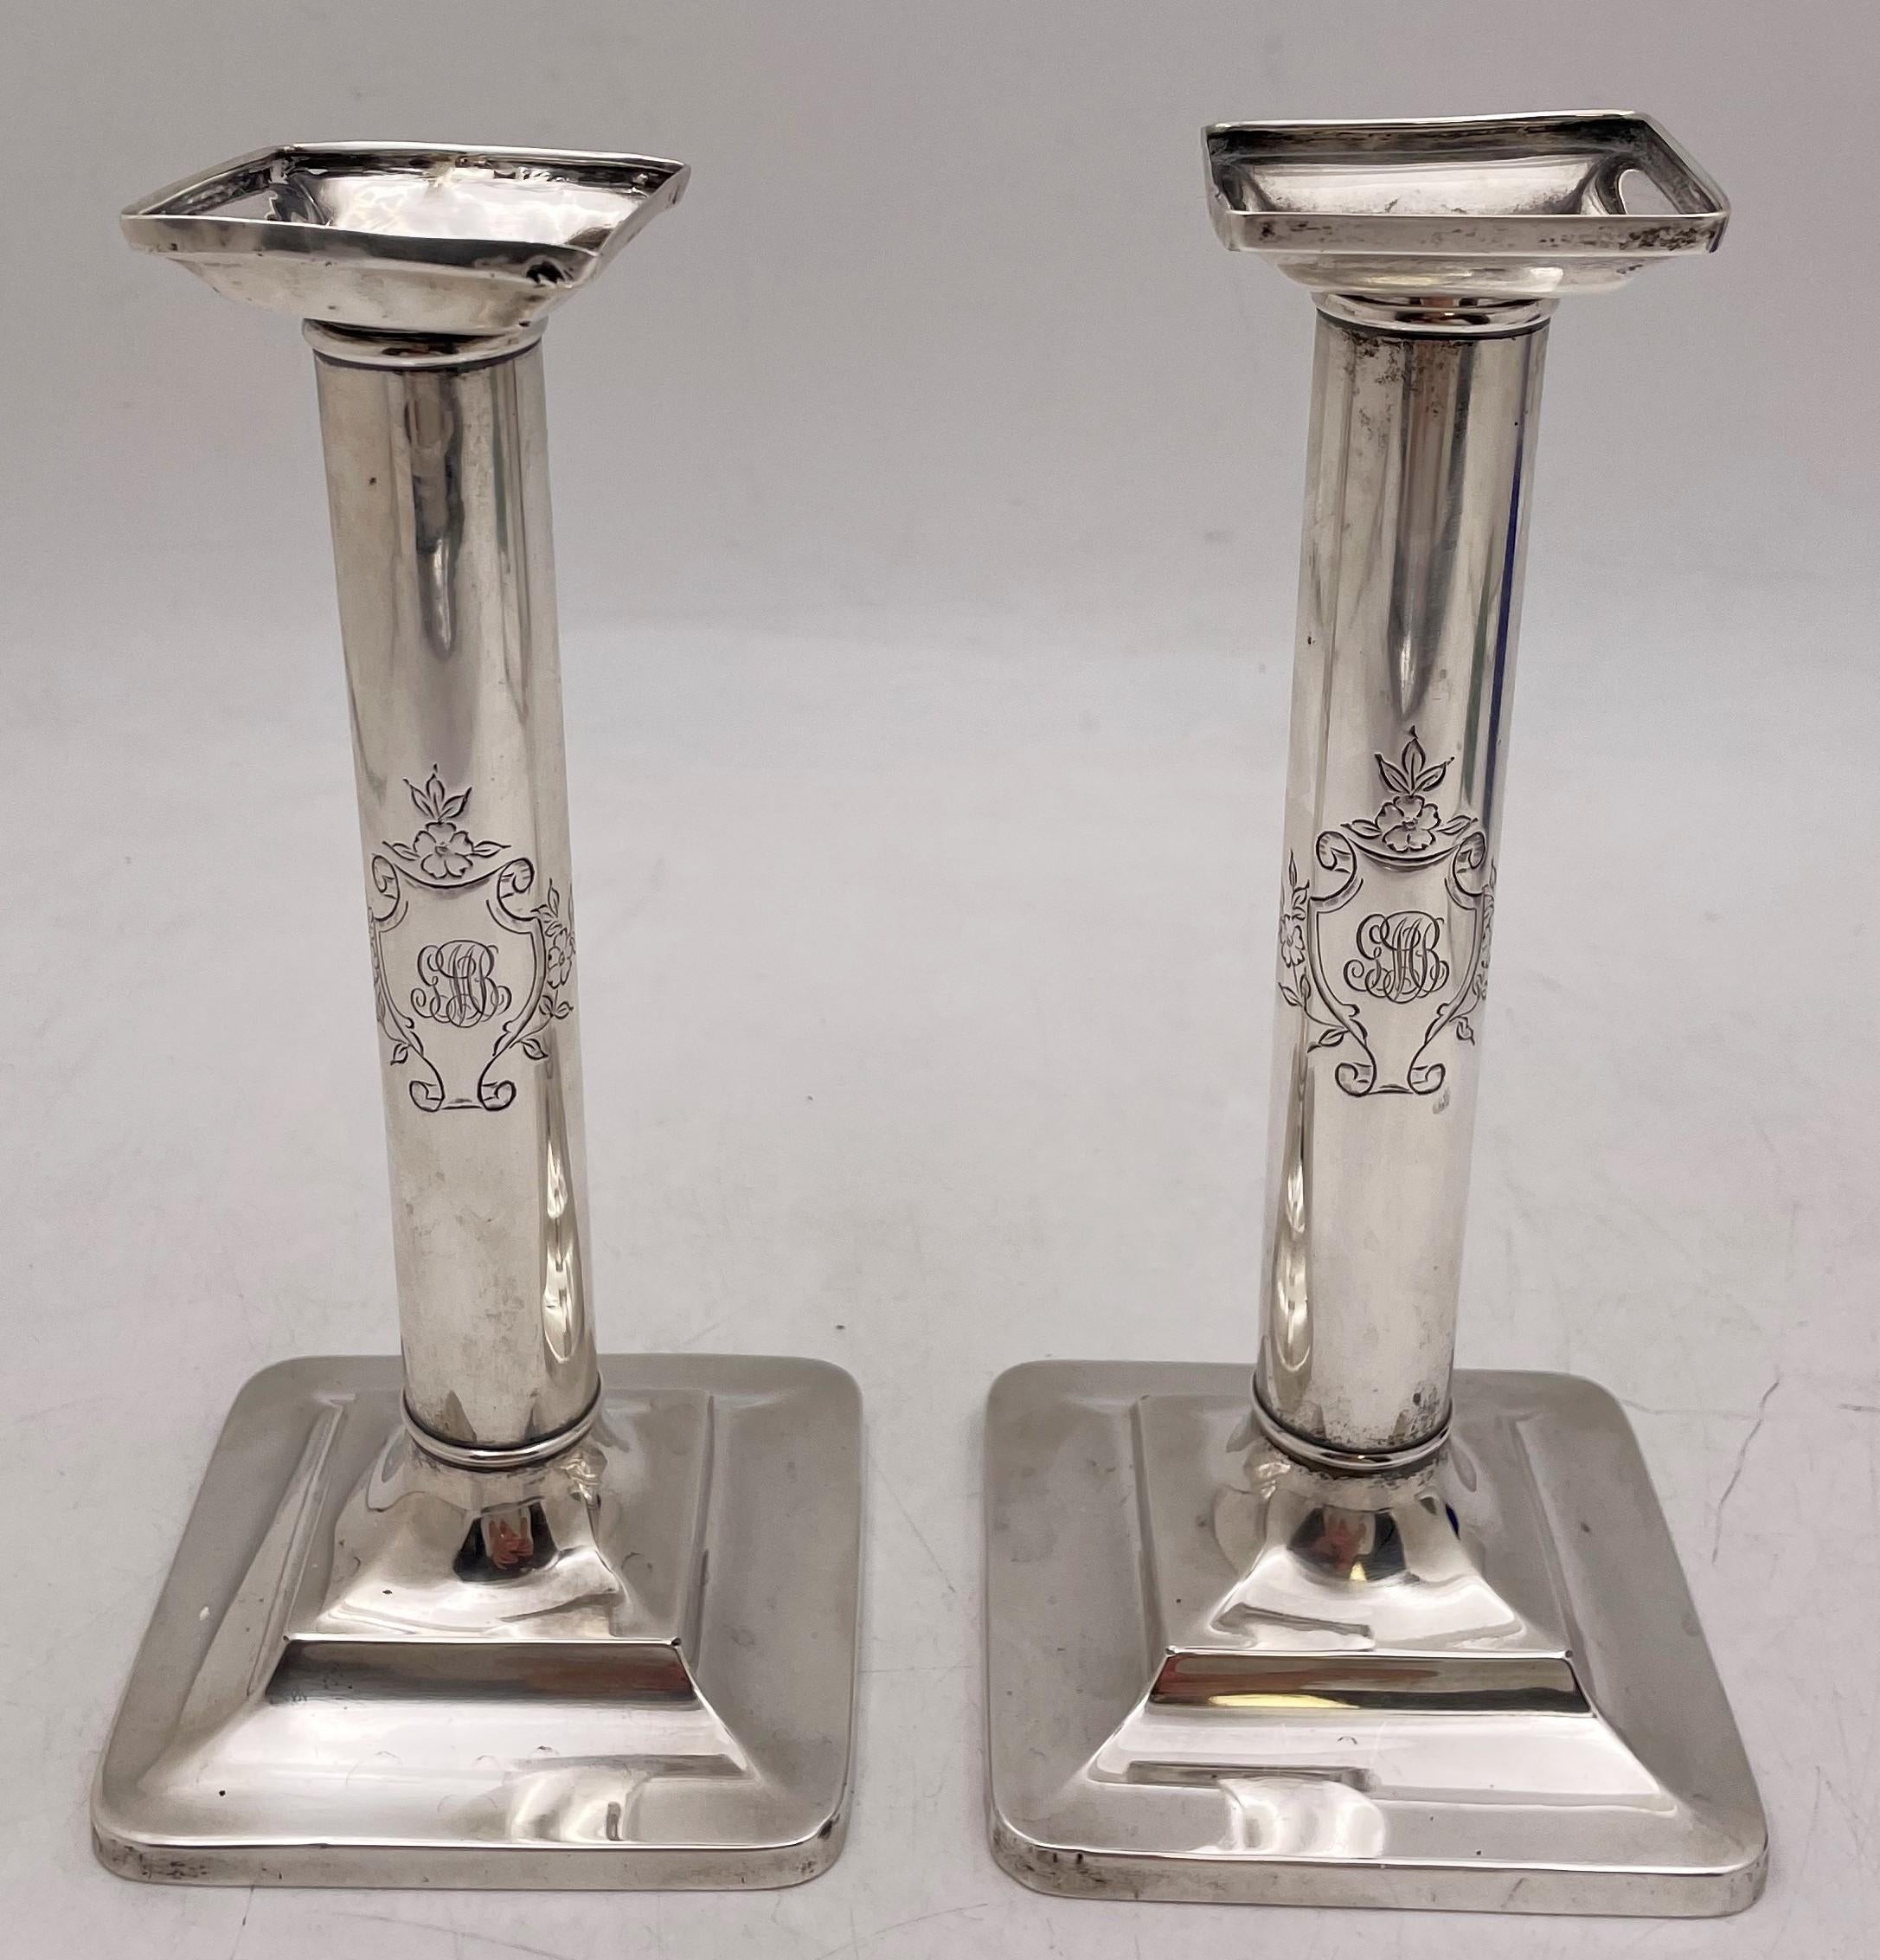 Pair of Tiffany & Co. sterling silver candlesticks in pattern 15893 from 1903, with bobeches, showcasing floral cartouches and a monogram, measuring 8'' in height by 3 3/4'' in depth (square base) and bearing hallmarks as shown. Sold 